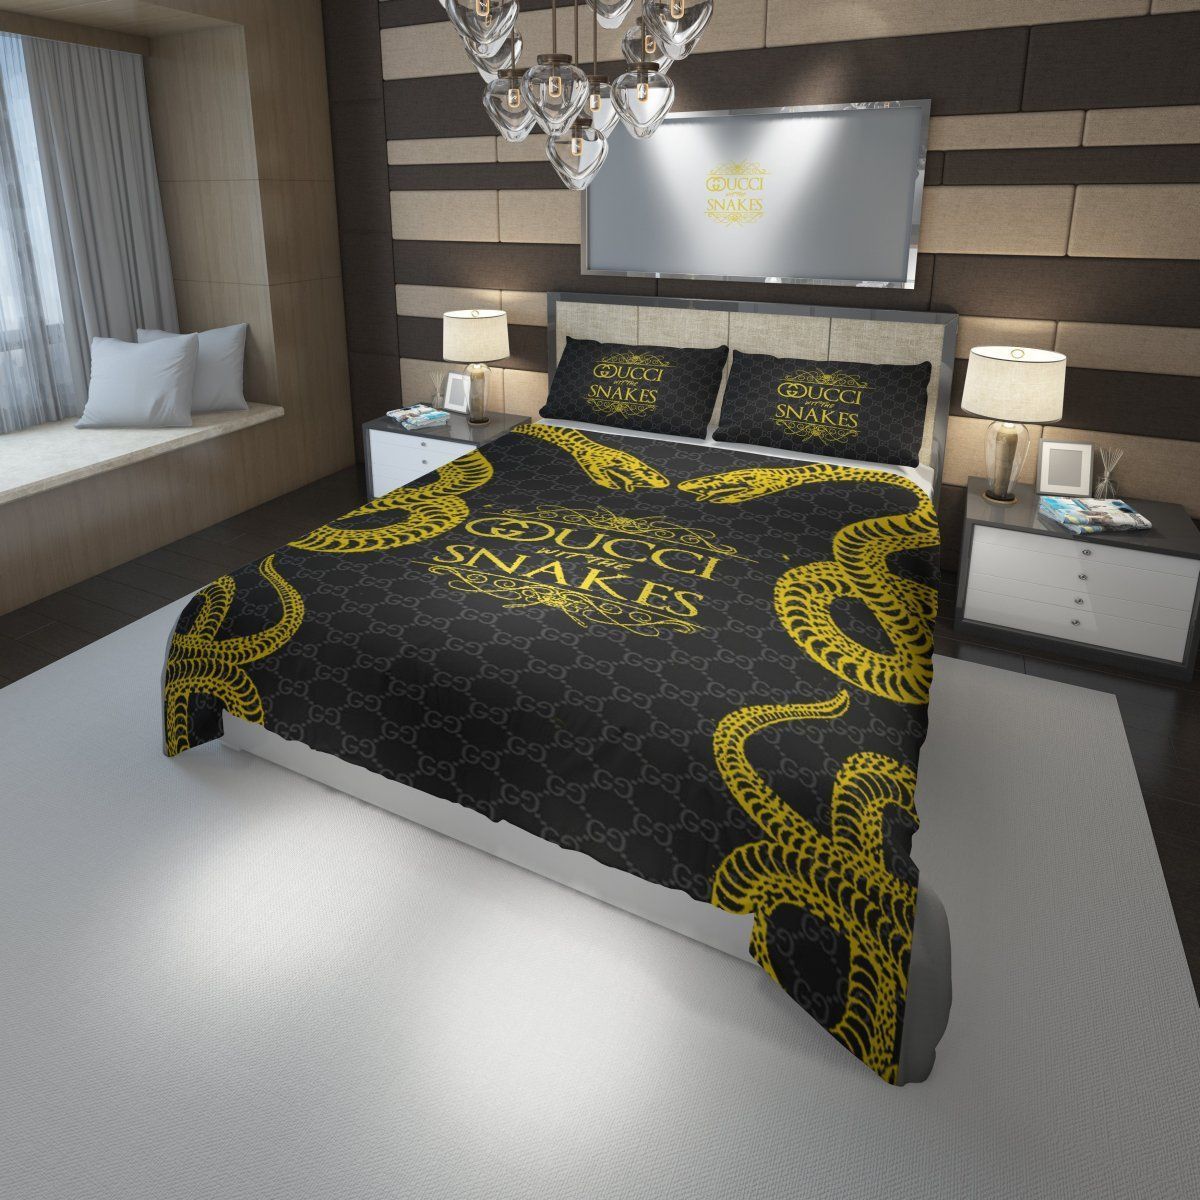 Let me show you about some luxury brand bedding set 2022 37